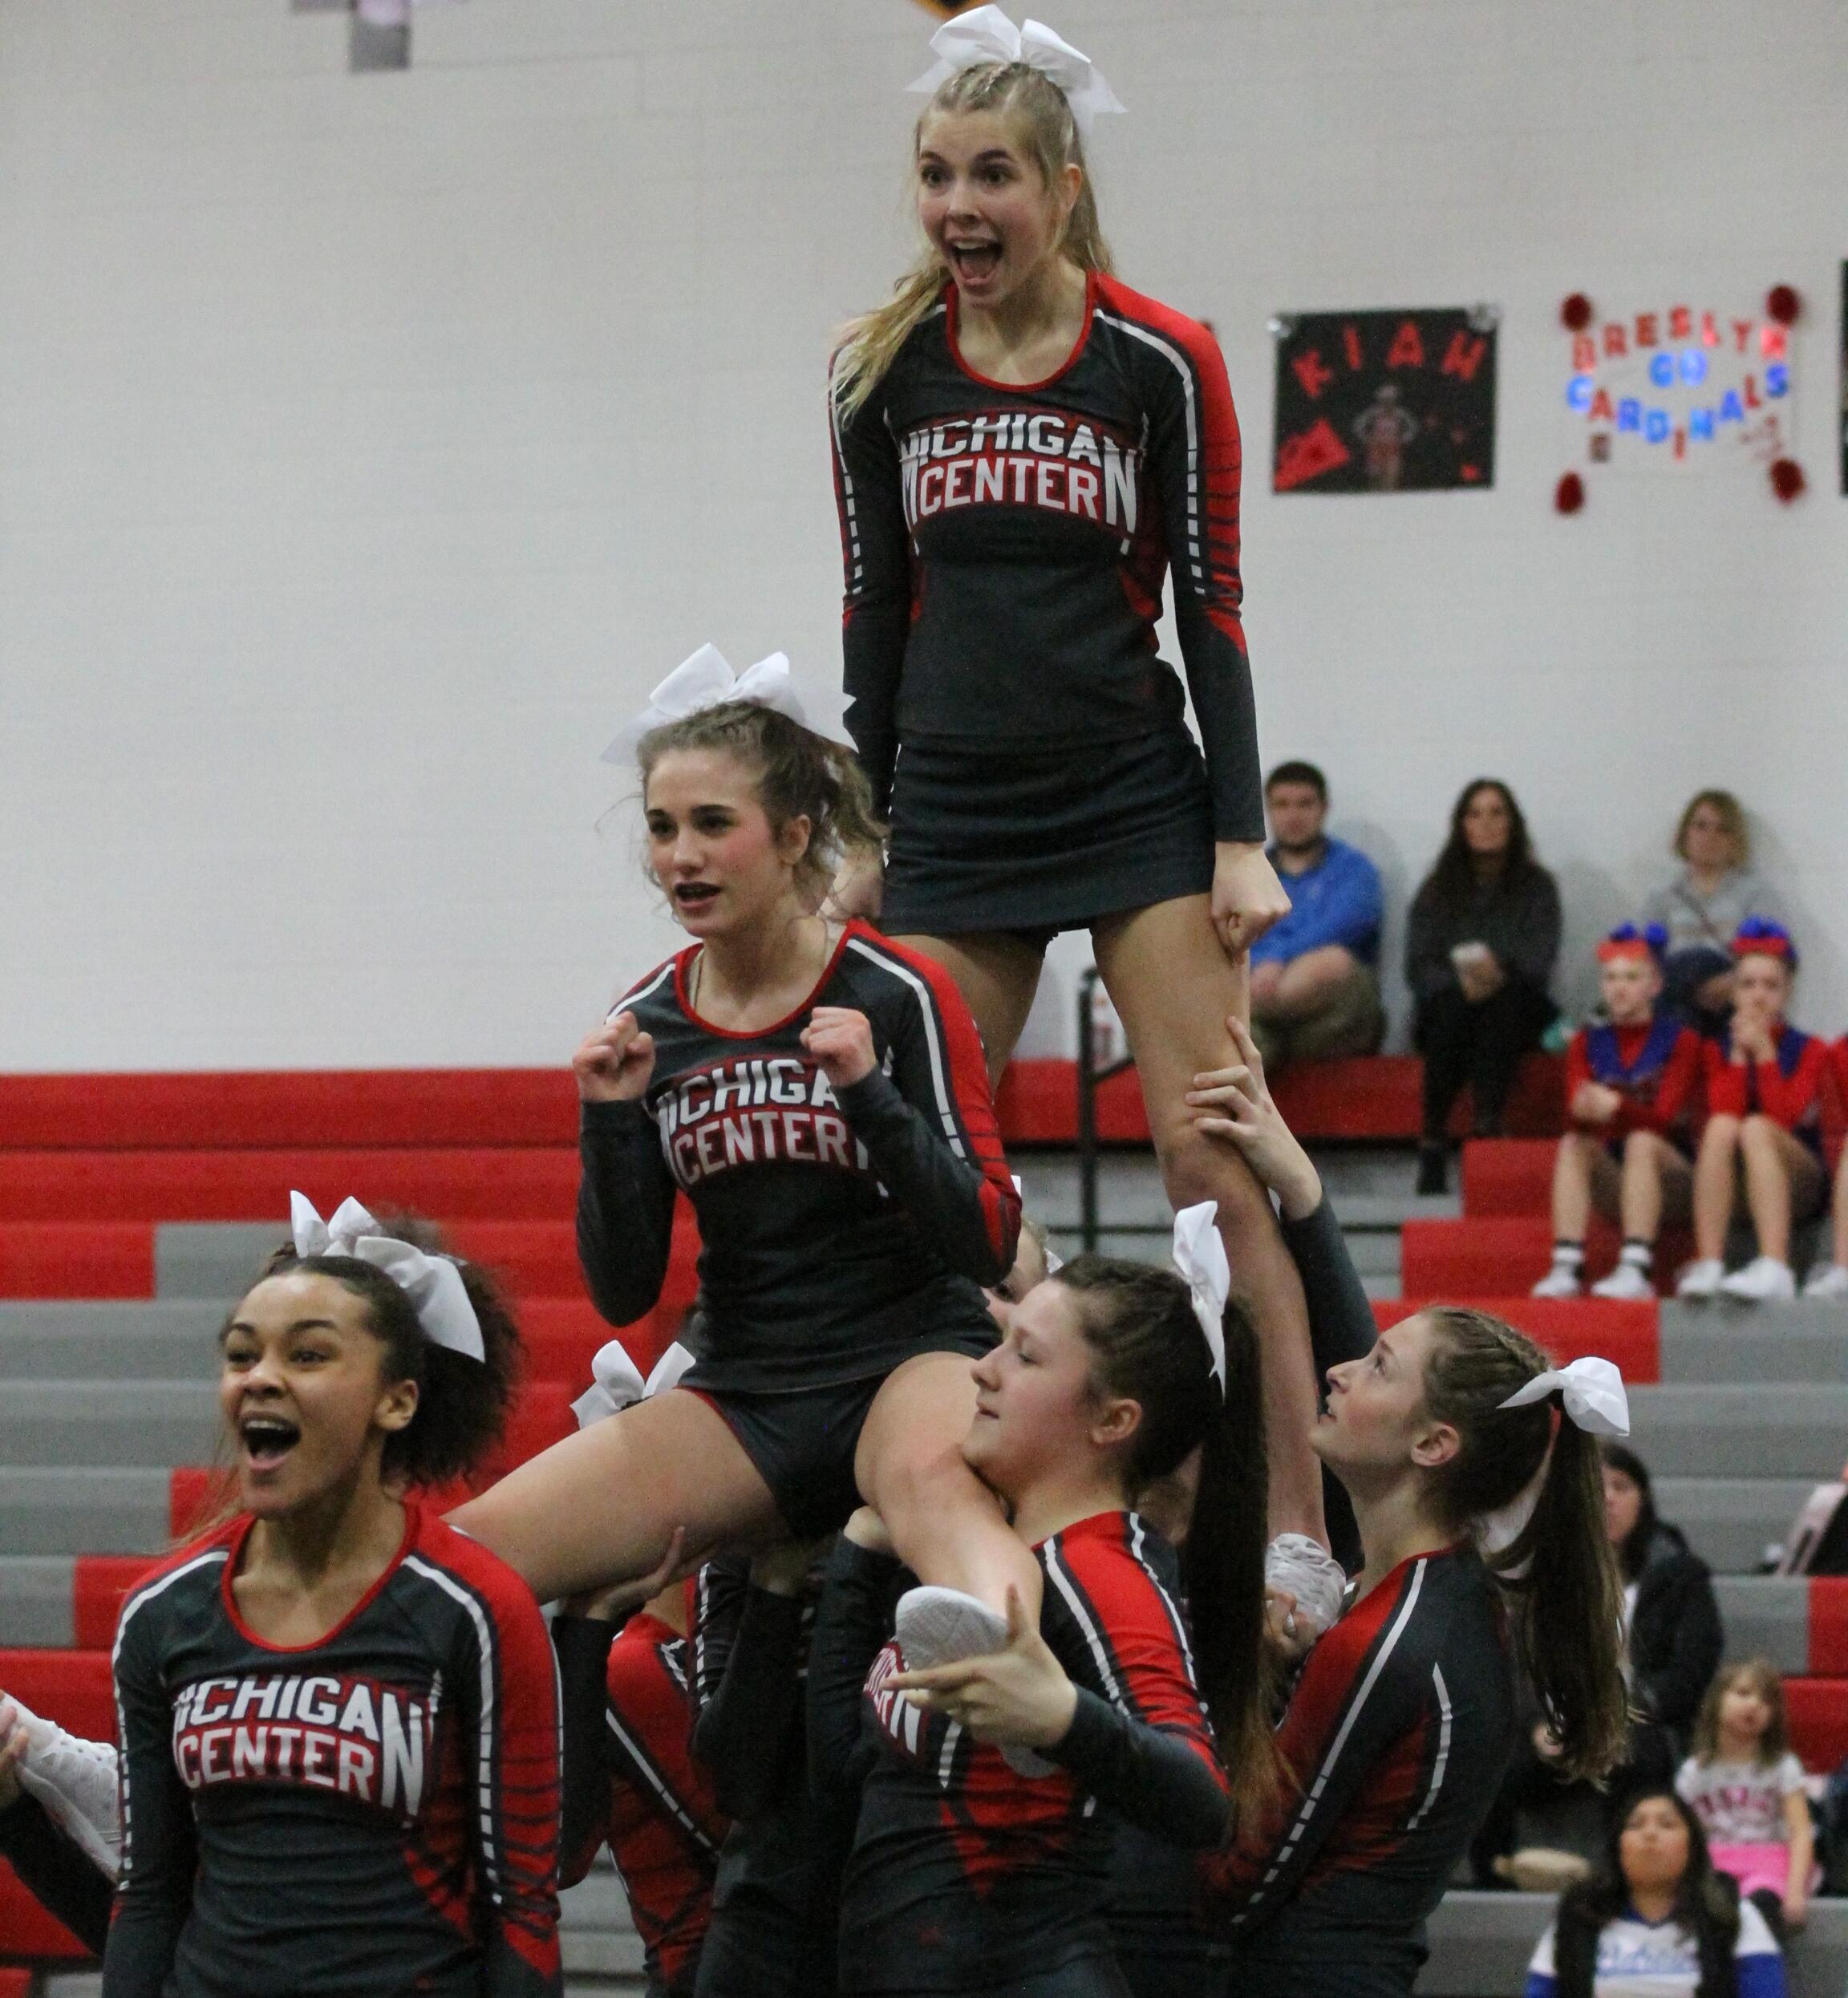 Cardinal Competitive Cheer